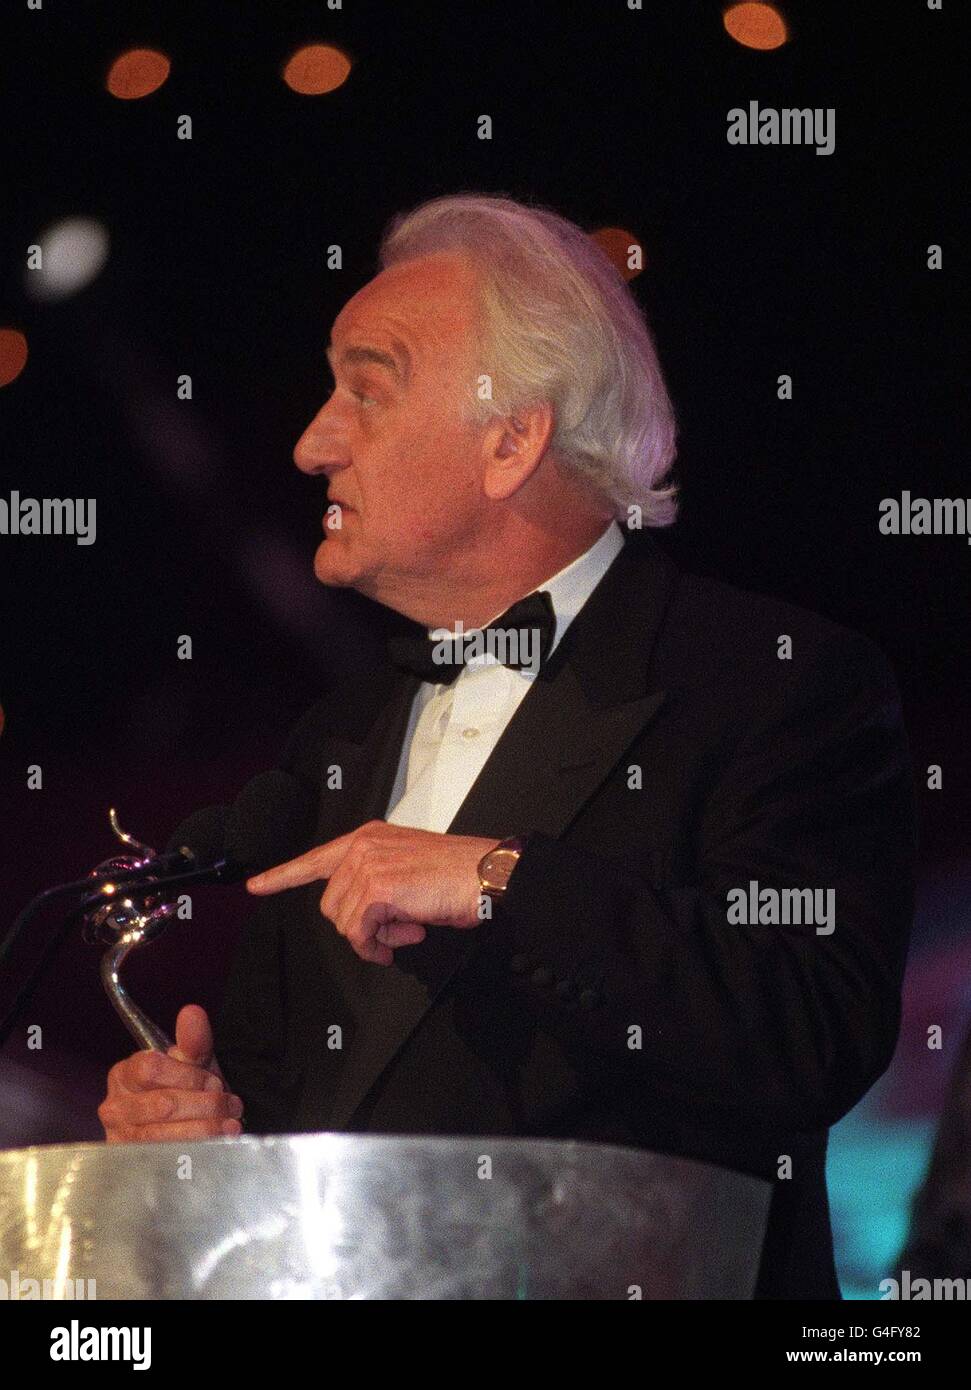 Actor John Thaw makes his acceptance speech after winning the award for Most Popular Actor and, later, a Special Recognition award, at the National TV Awards at the Royal Albert Hall in London tonight (Tuesday). Picture by Ben Curtis/PA. See PA story SHOWBIZ Awards. 21/02/02: John Thaw (left) and co-star Dennis Waterman in the Thames TV's series - The Sweeney - who play Det. Inspector Jack Regan (Thaw) and his partner, Det. Sergeant George Carter.: Actor John Thaw, 60, star of Inspector Morse and The Sweeney, died at home this afternoon, his family said. Stock Photo